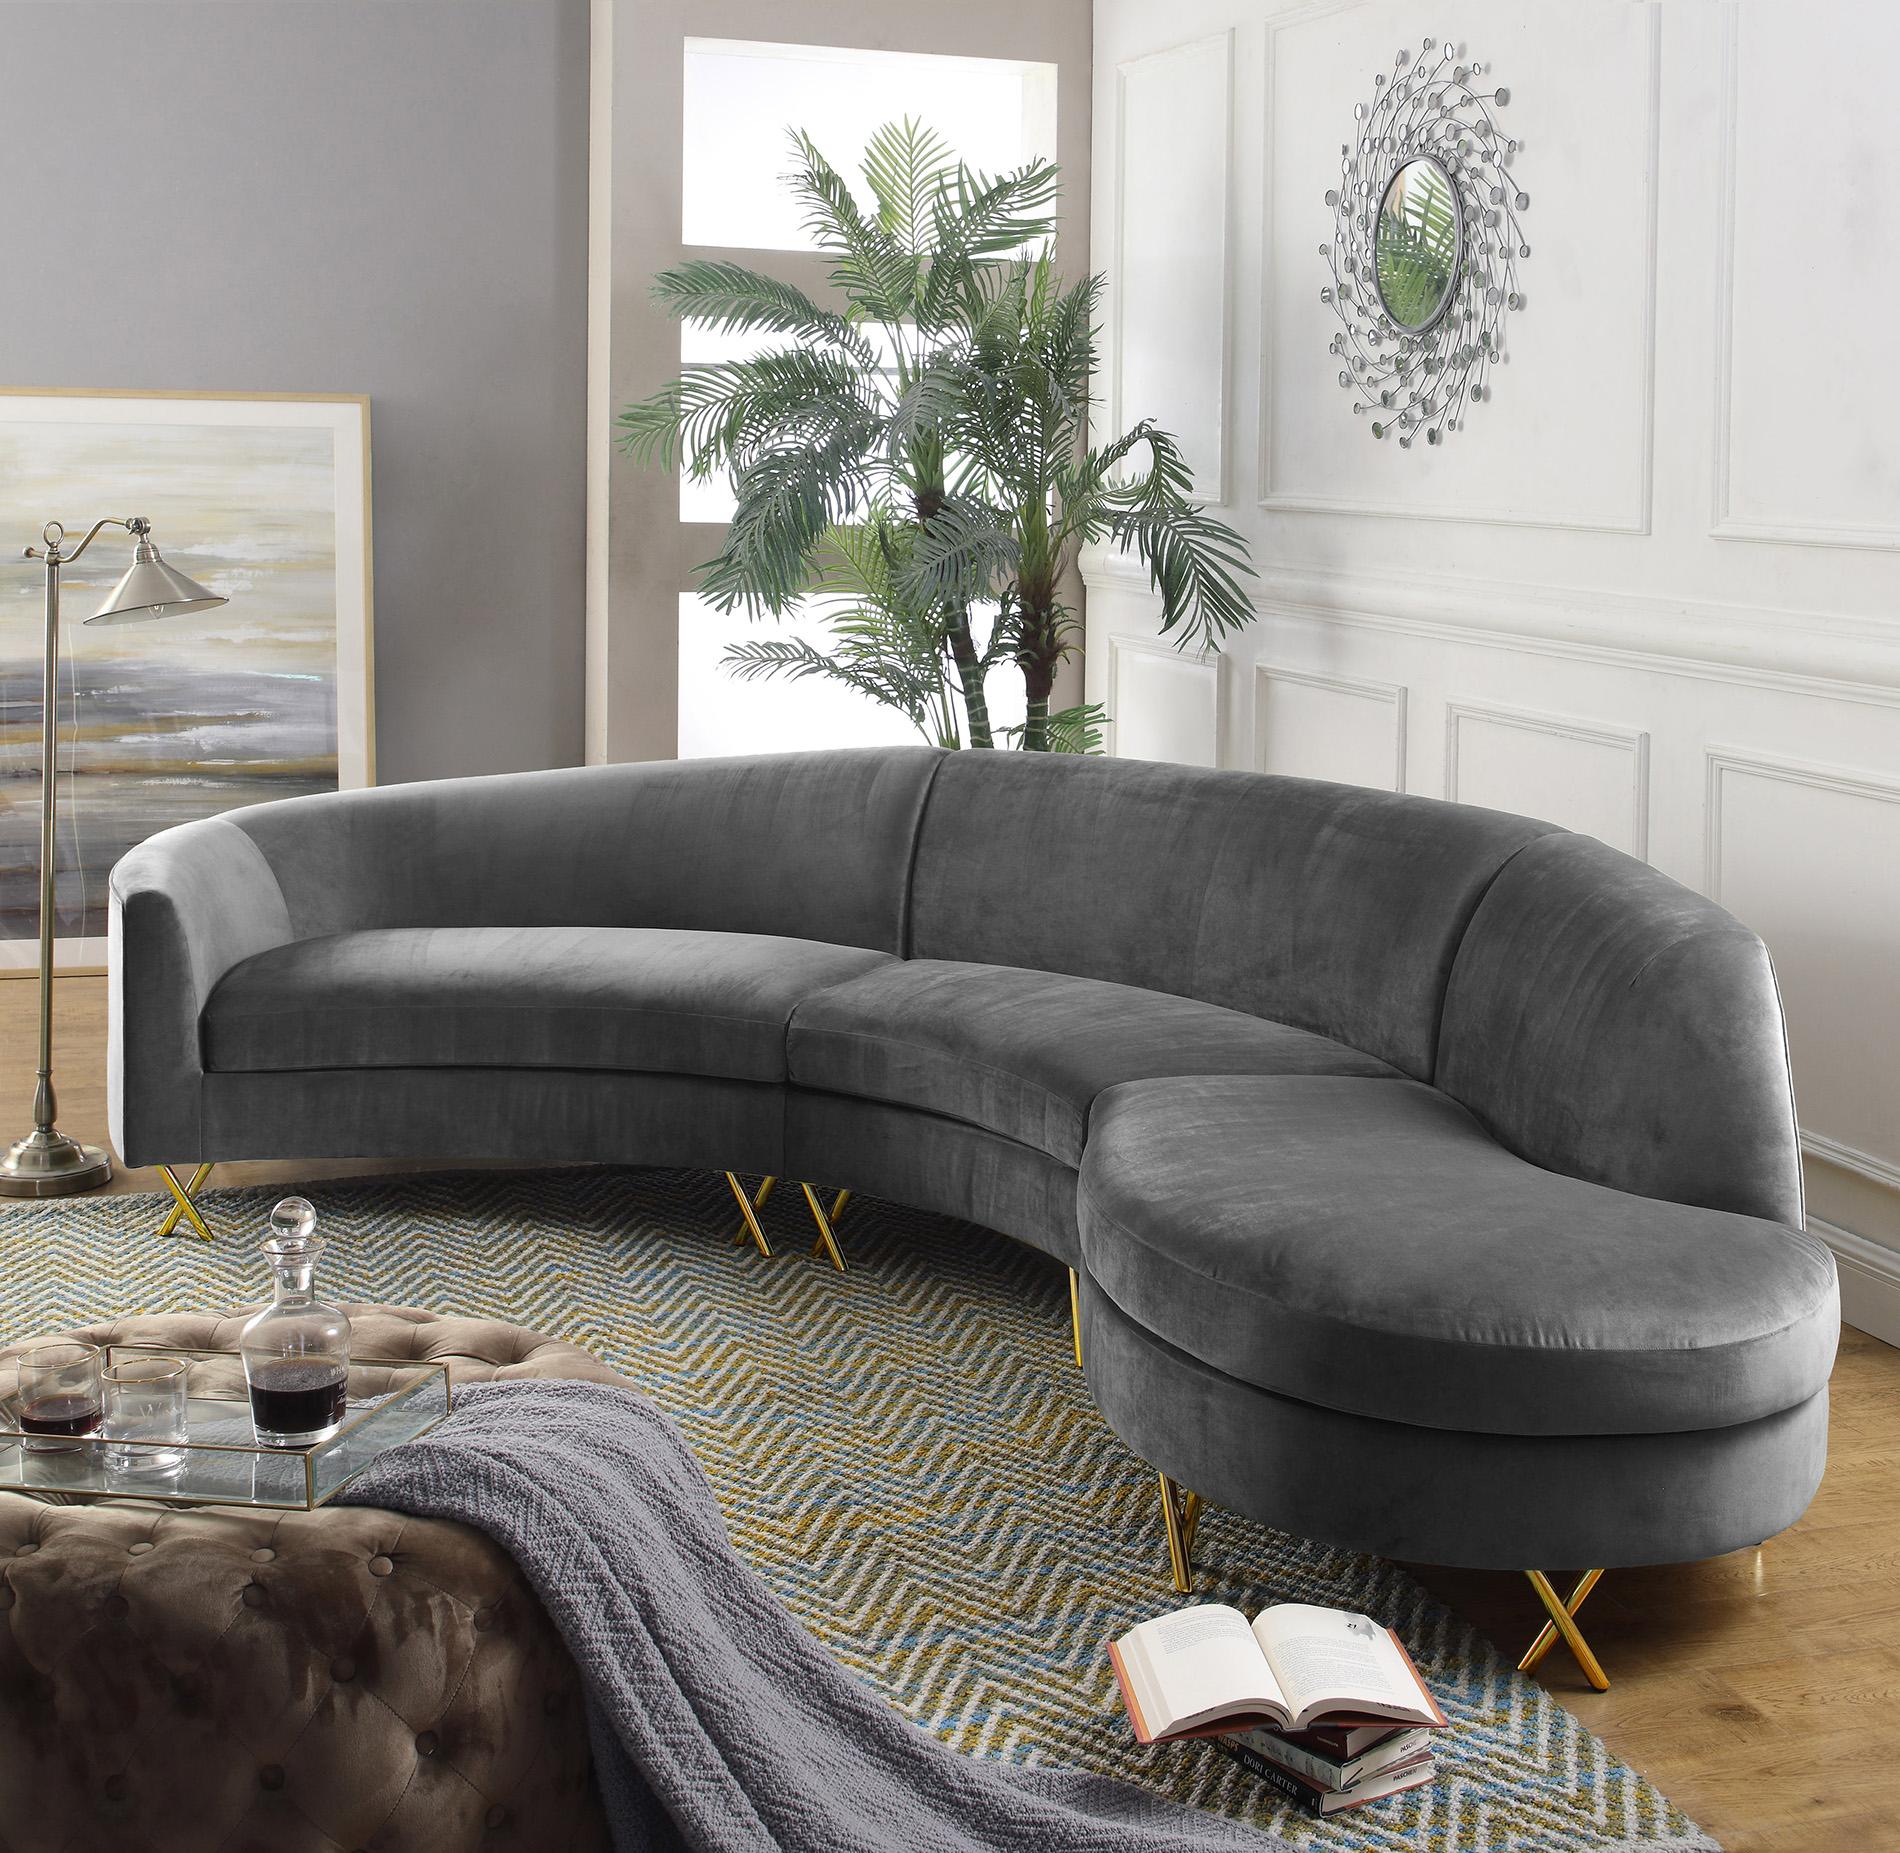 Contemporary, Modern Sectional Sofa SERPENTINE 671Grey 671Grey-Sectional in Gray Velvet